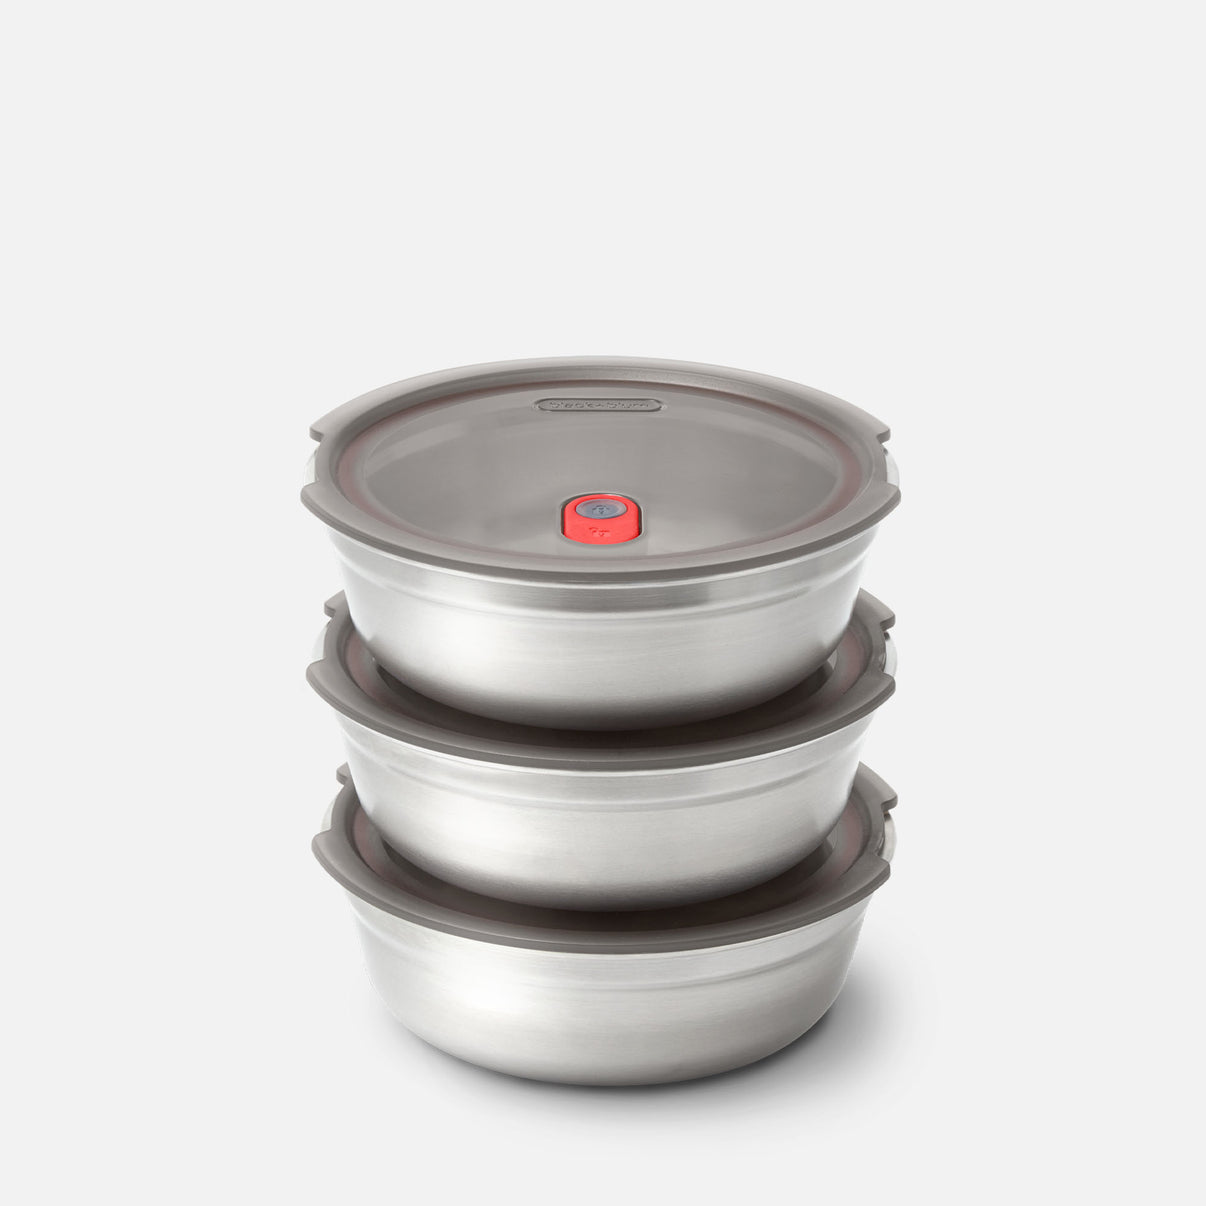 worldstainless - Stainless steel reusable and microwave safe food